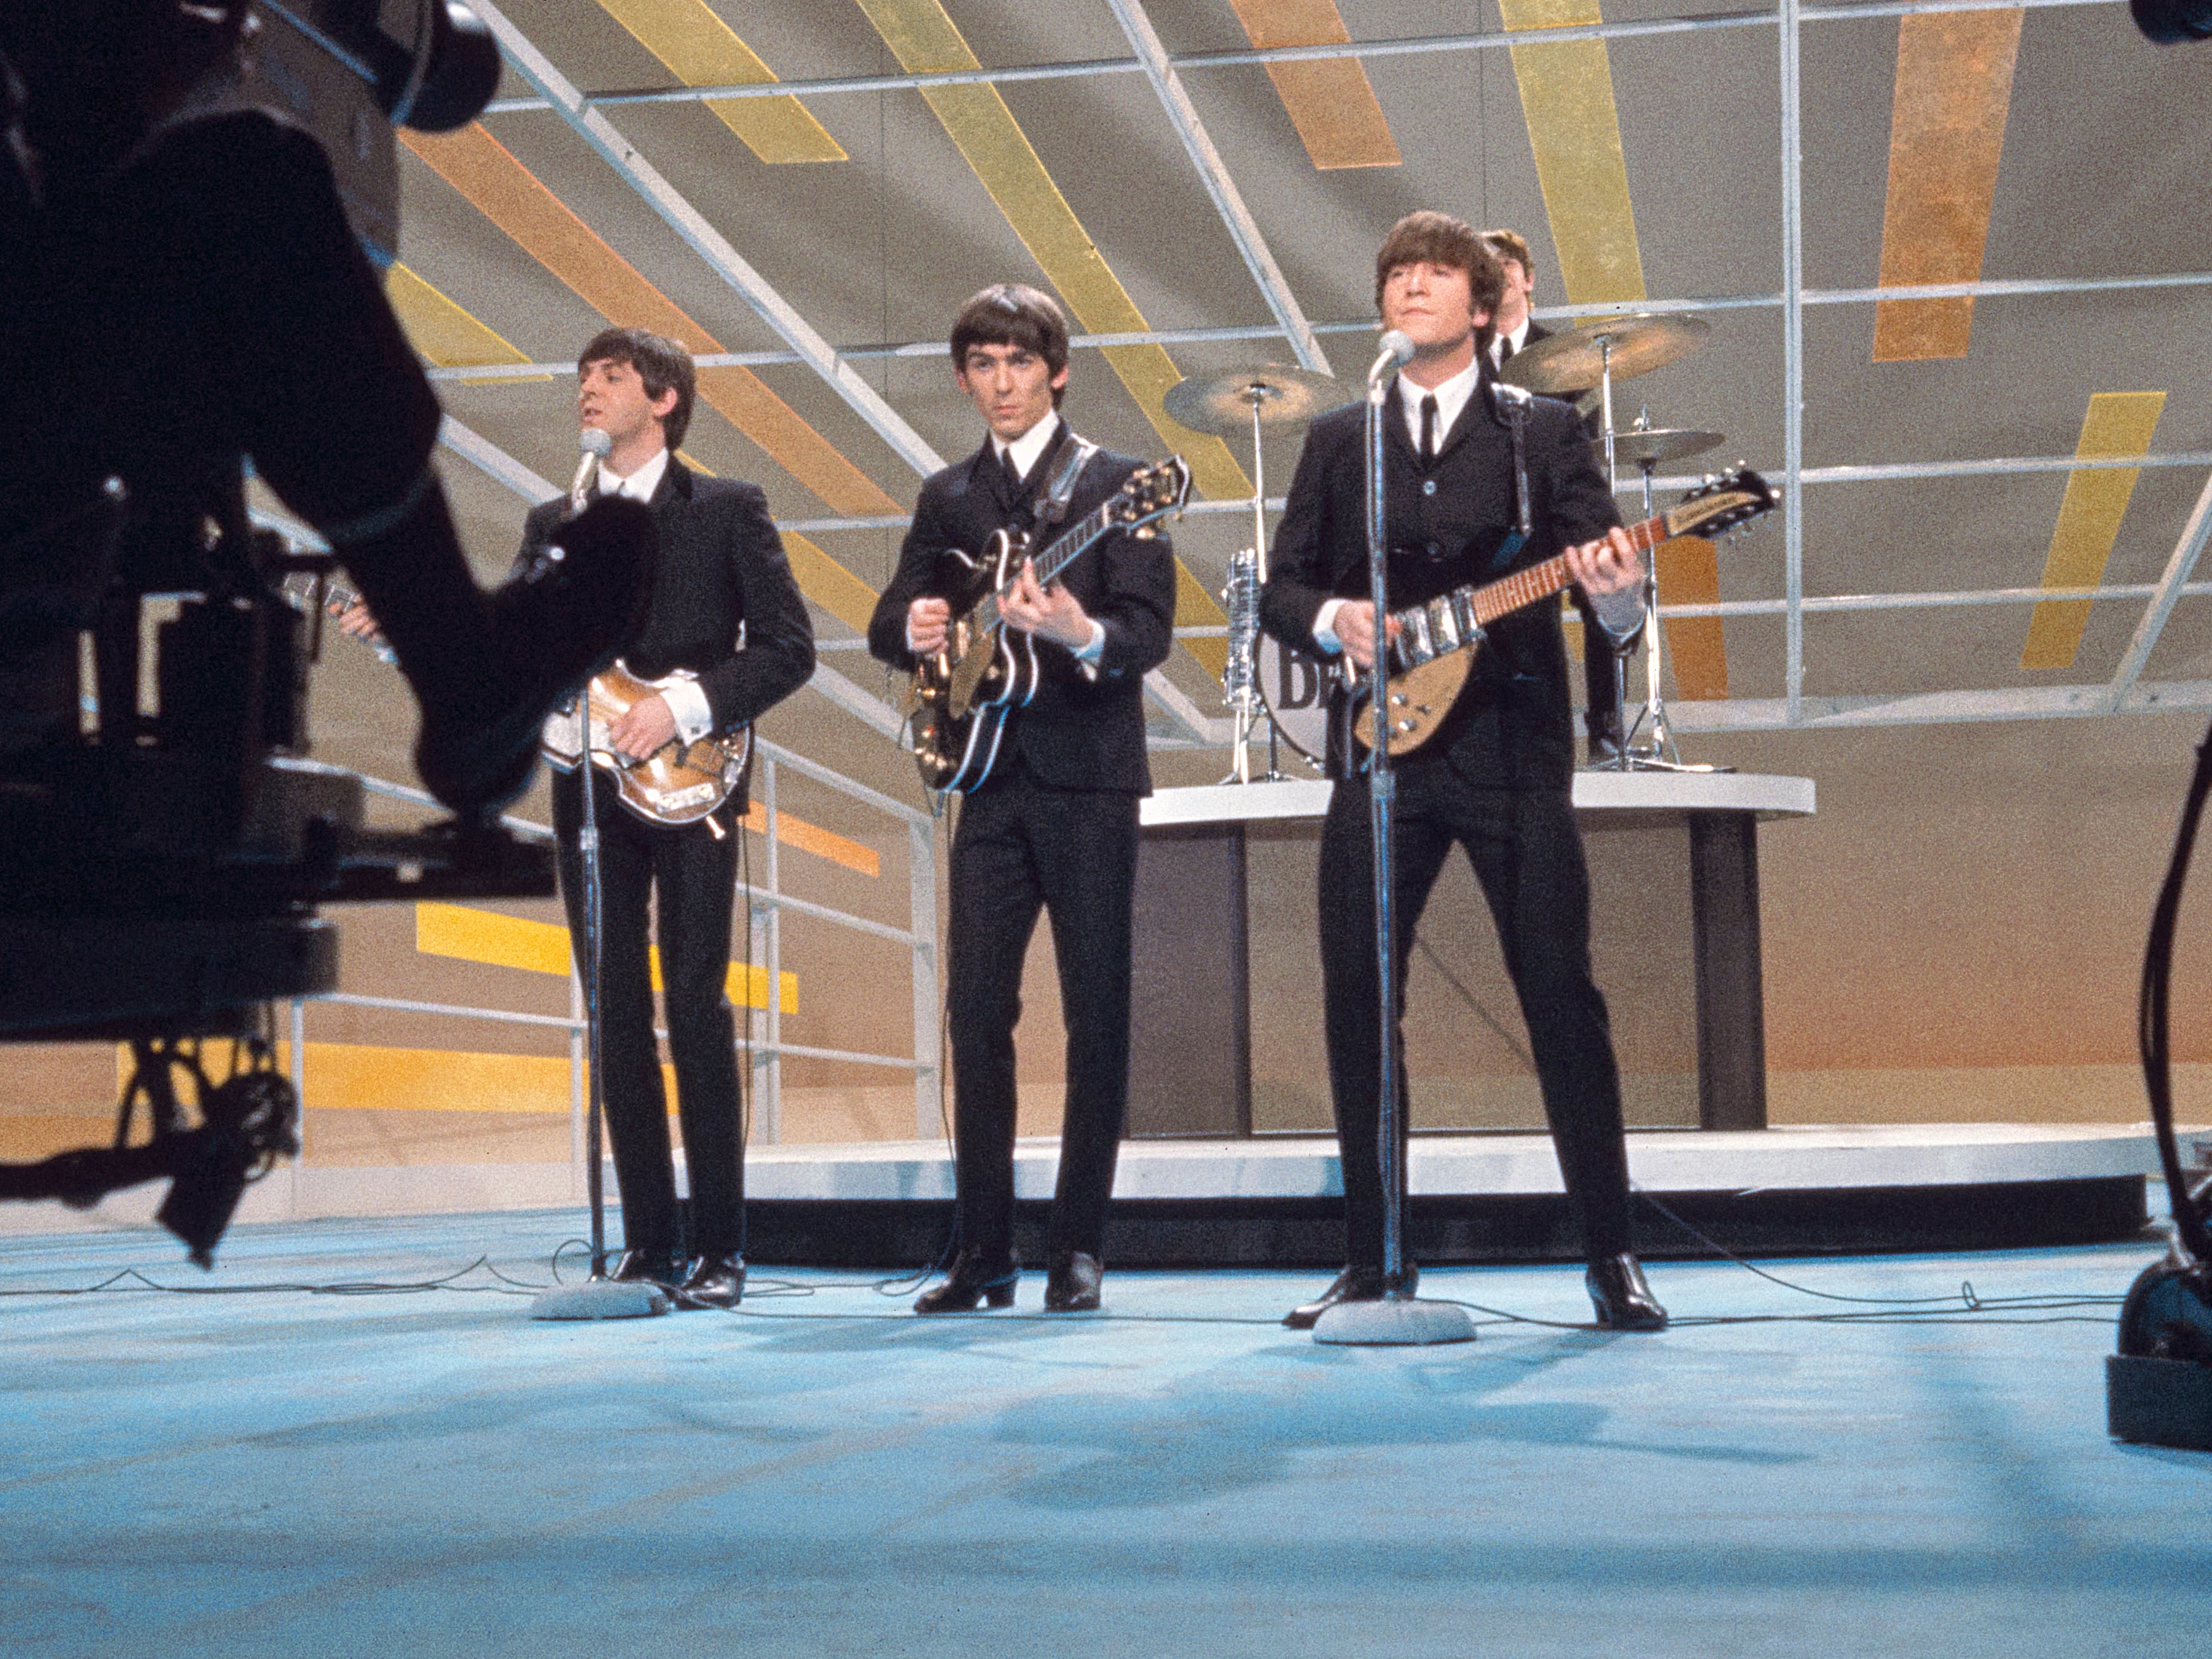 The Beatles performing on ‘The Ed Sullivan Show’ in New York City in February 1964